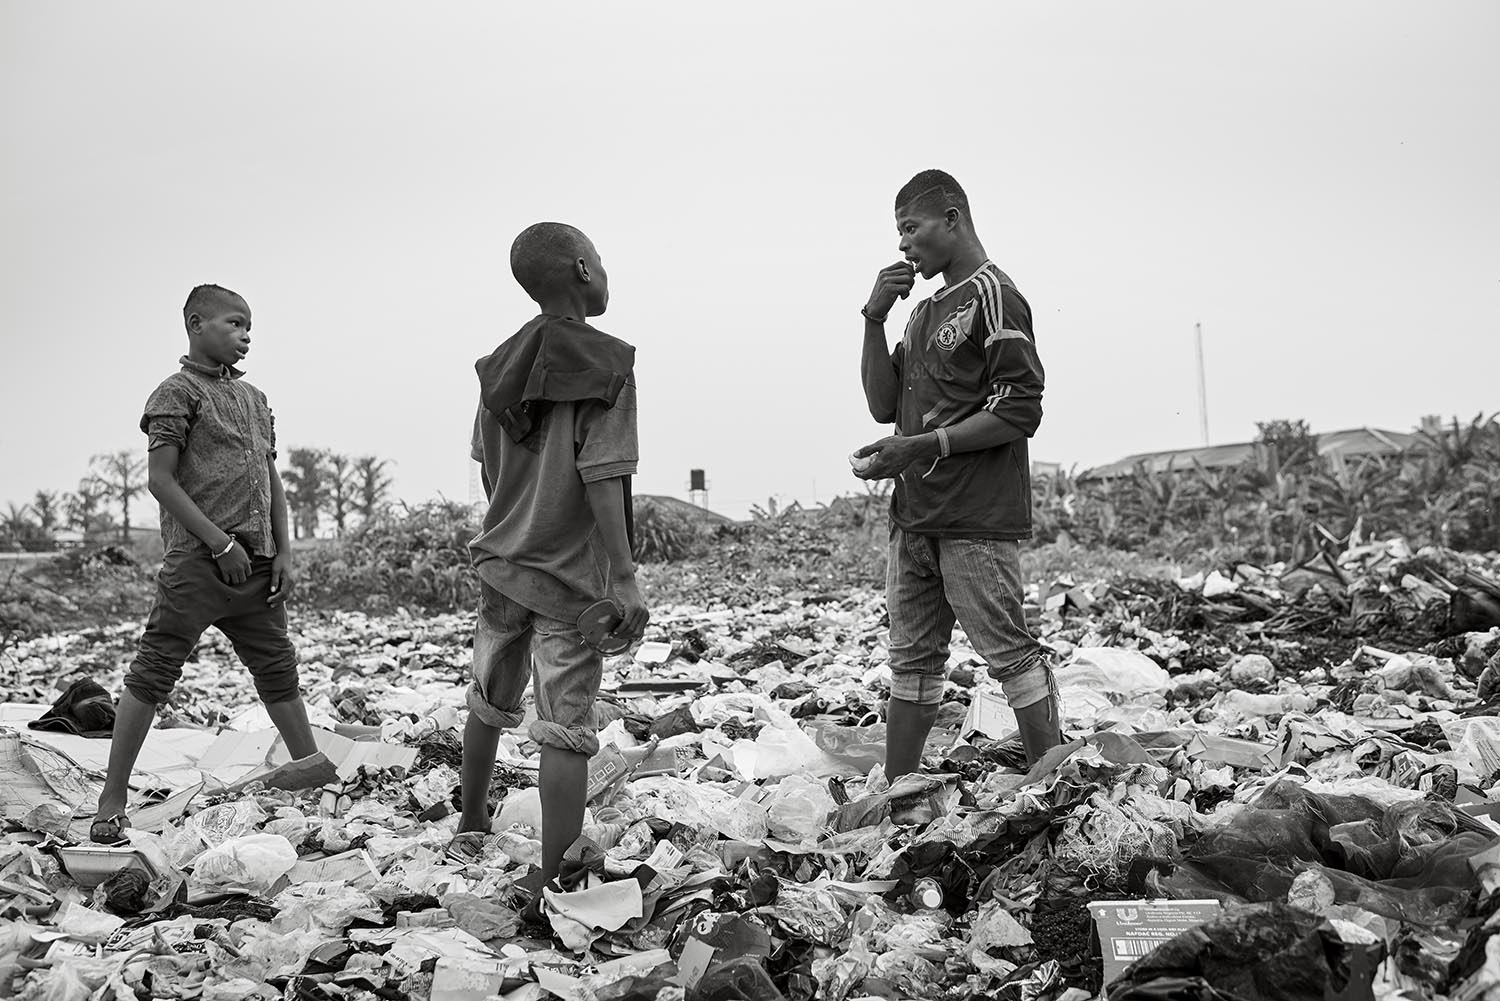  These streetkids find their meal on the dump. Victor, Daniel and King have been accused of witchcraft and consequently nearly lost their lives.&nbsp; Their parents are scared of witches and tried to kill their children or cast them out of the street